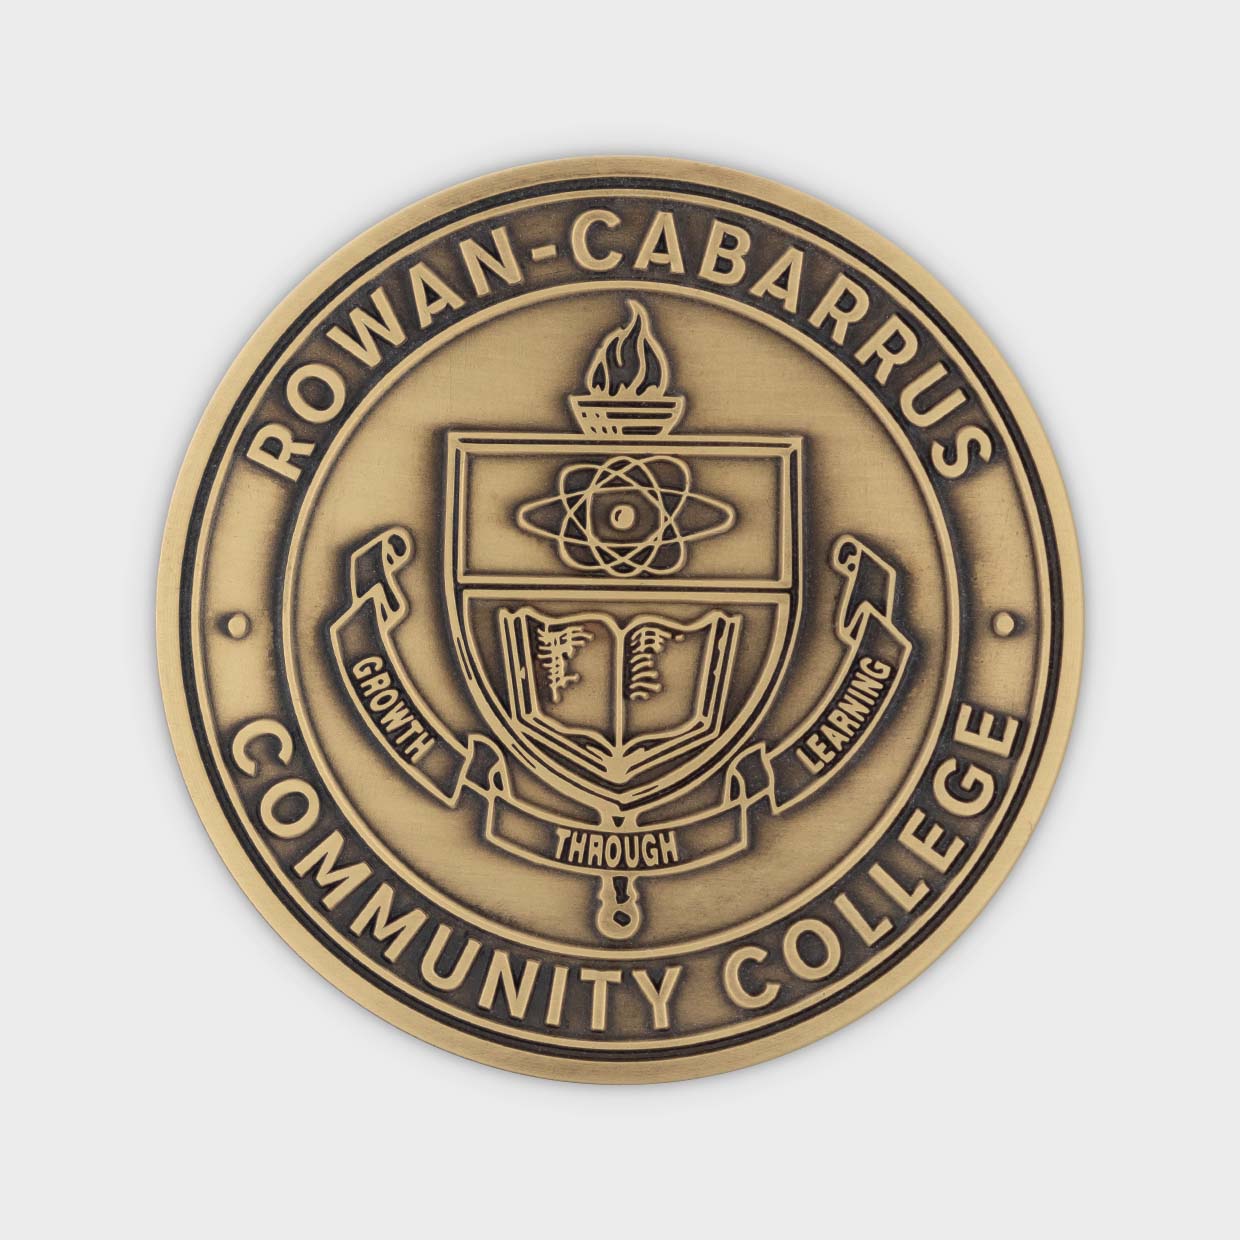 Rowan-Cabarrus Community College Chain of Office Medal